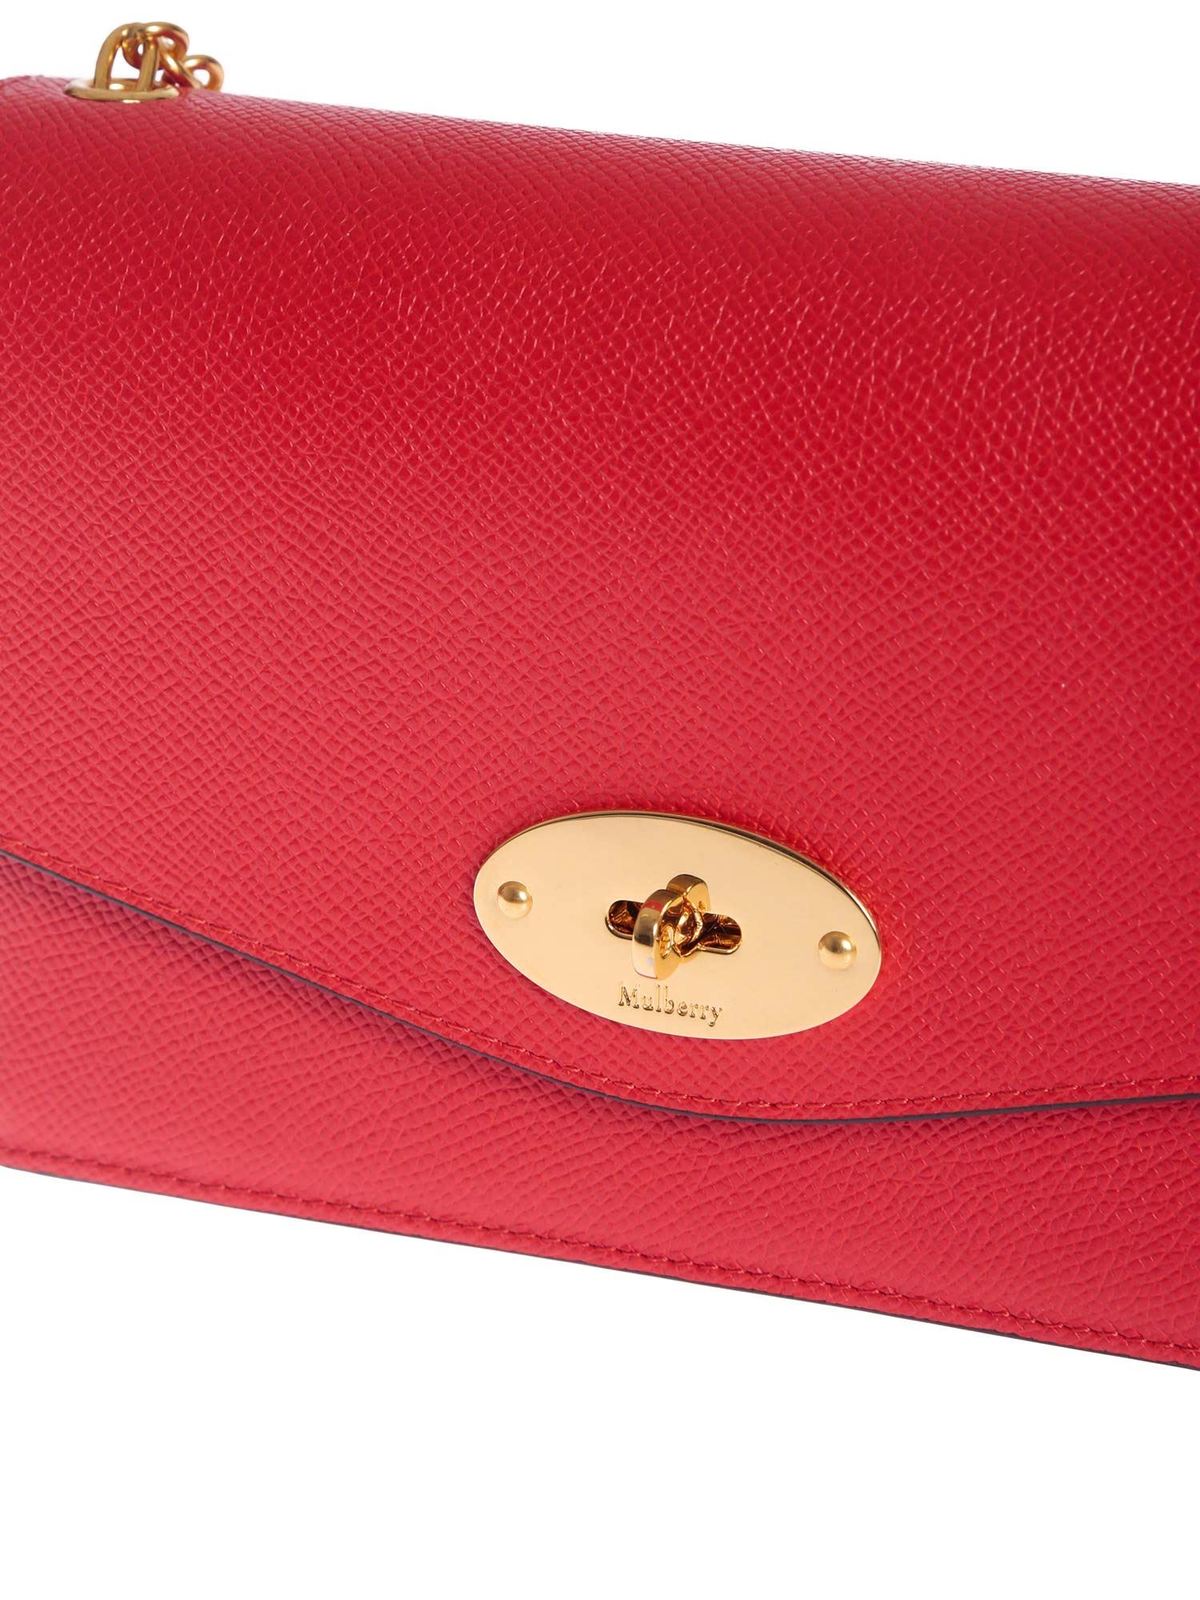 Shoulder bags Mulberry - Small Darley bag Lipstick Red RL6056161L657